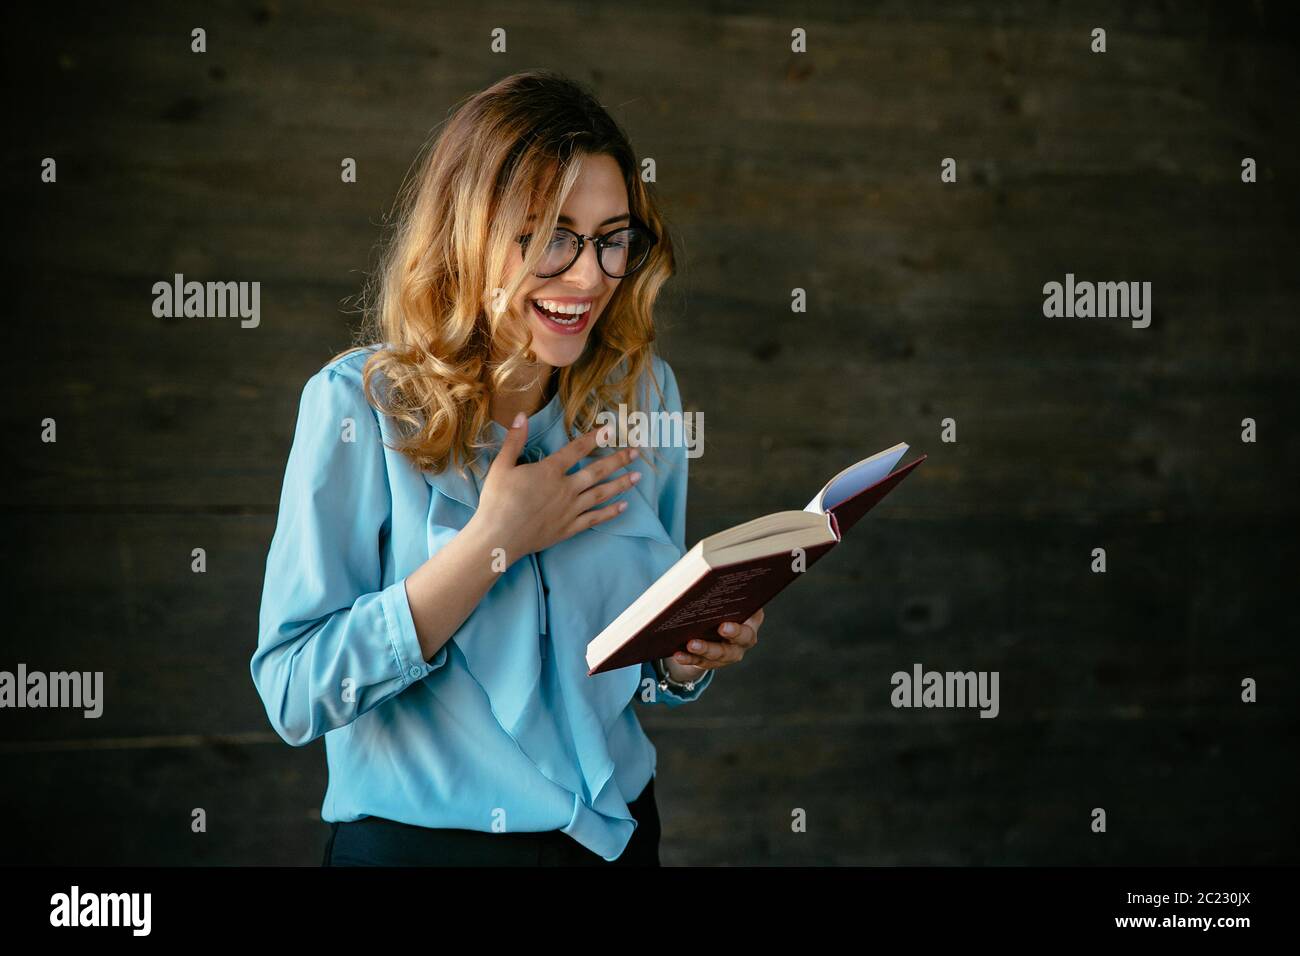 Charming young woman bursting out of laugh after reading something funny in book. Dressed in elegant blouse, in eyeglasses. Stock Photo